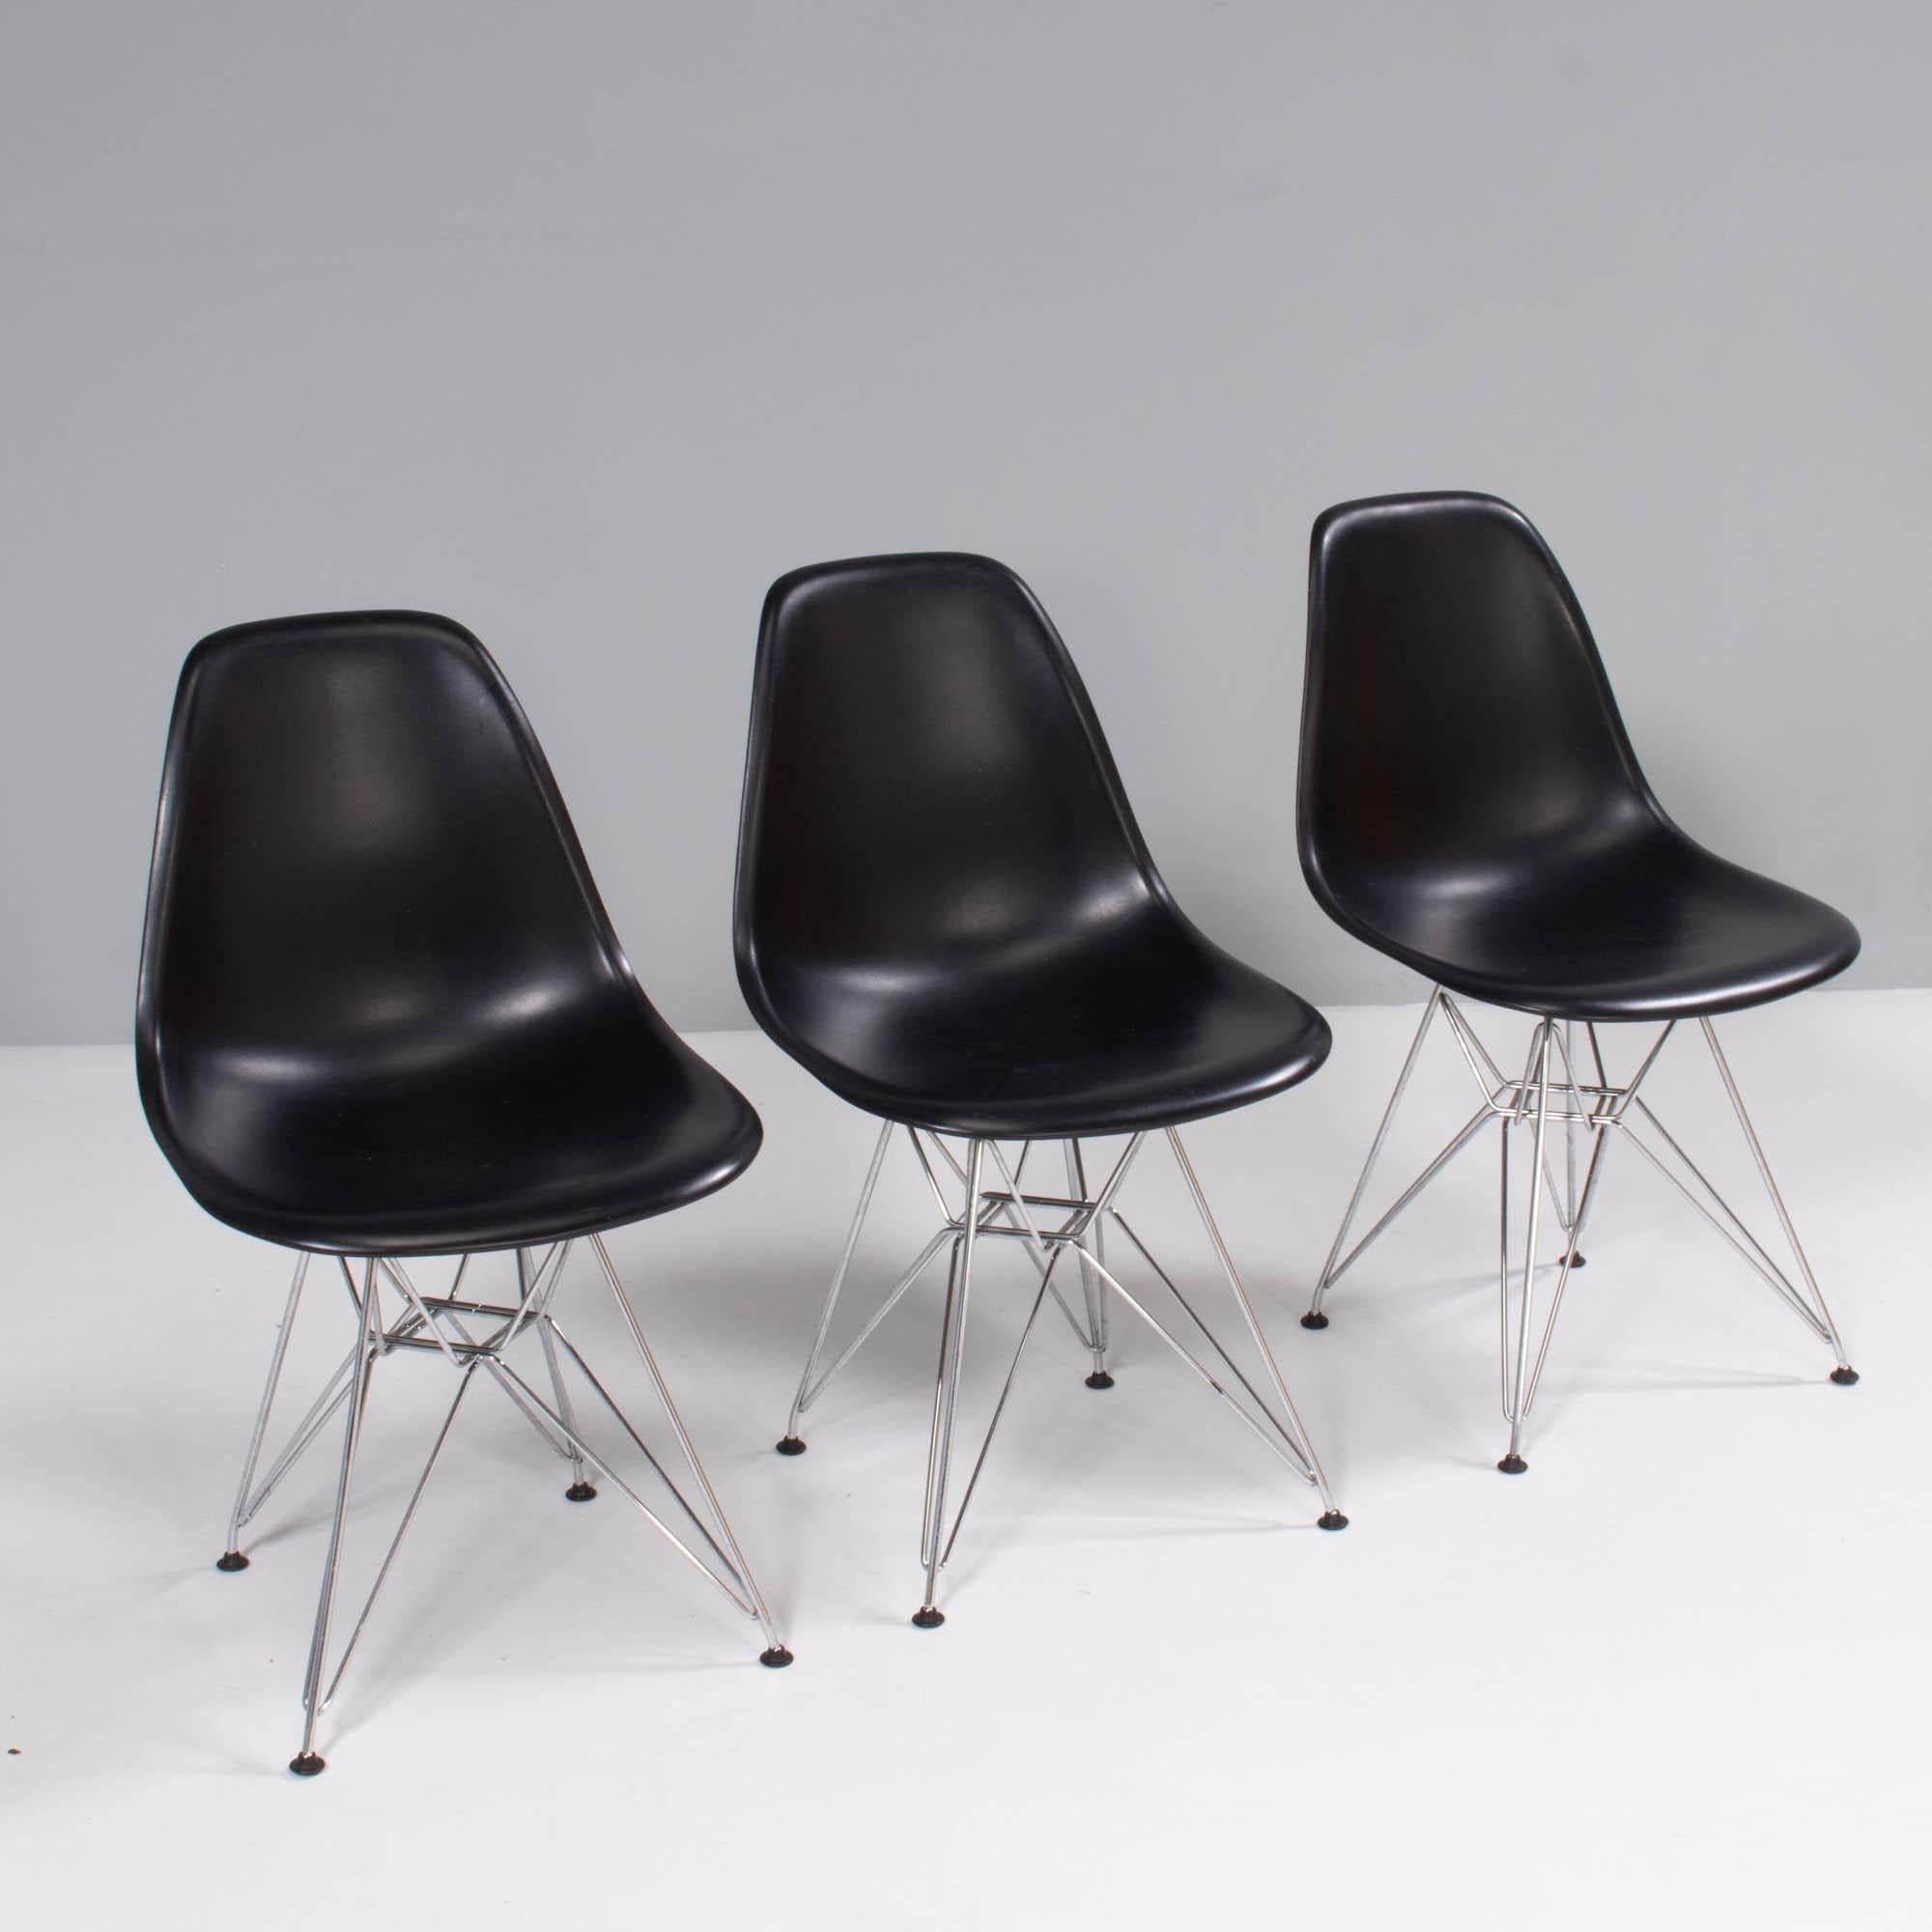 Originally designed in 1950 by Charles & Ray Eames, the DSR chair has since become one of the most recognisable furniture designs of the twentieth-century.

Designed as part of the plastic chair series, the DSR chair features the iconic chrome